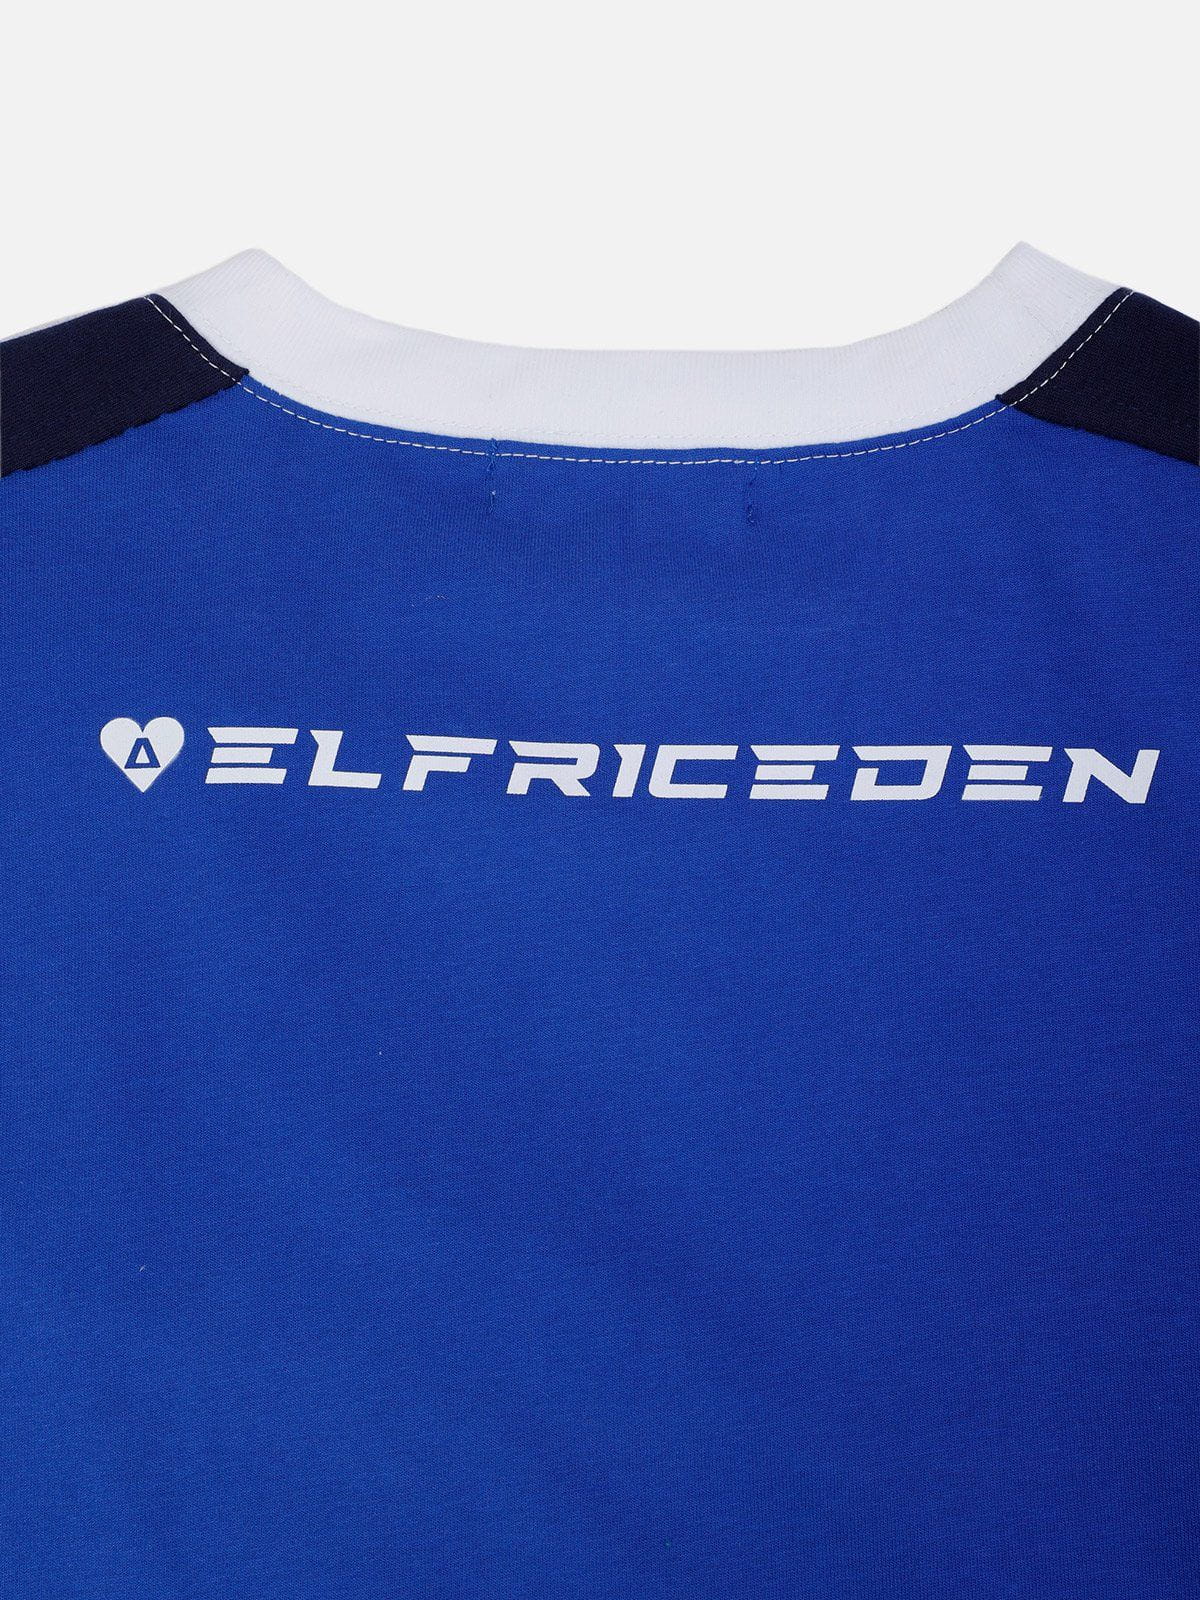 Aelfric Eden Color Blocking Racing Tee<font color=